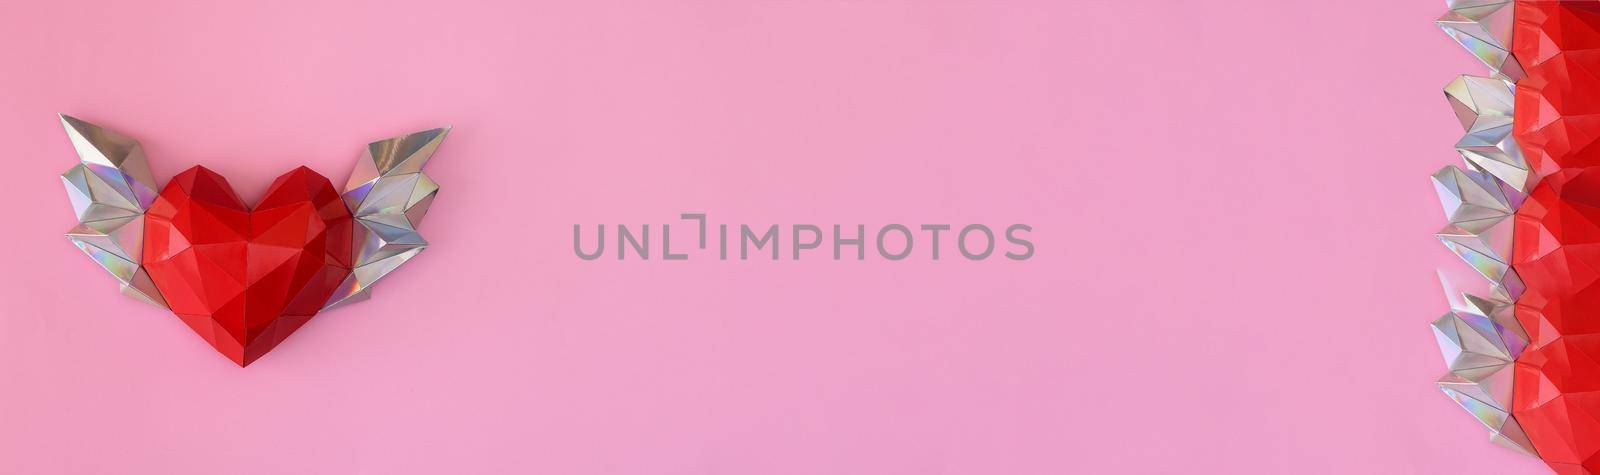 Banner. A heart with wings. Greeting card for Valentine's Day, weddings. On a pink background. Polygon shape. copy space